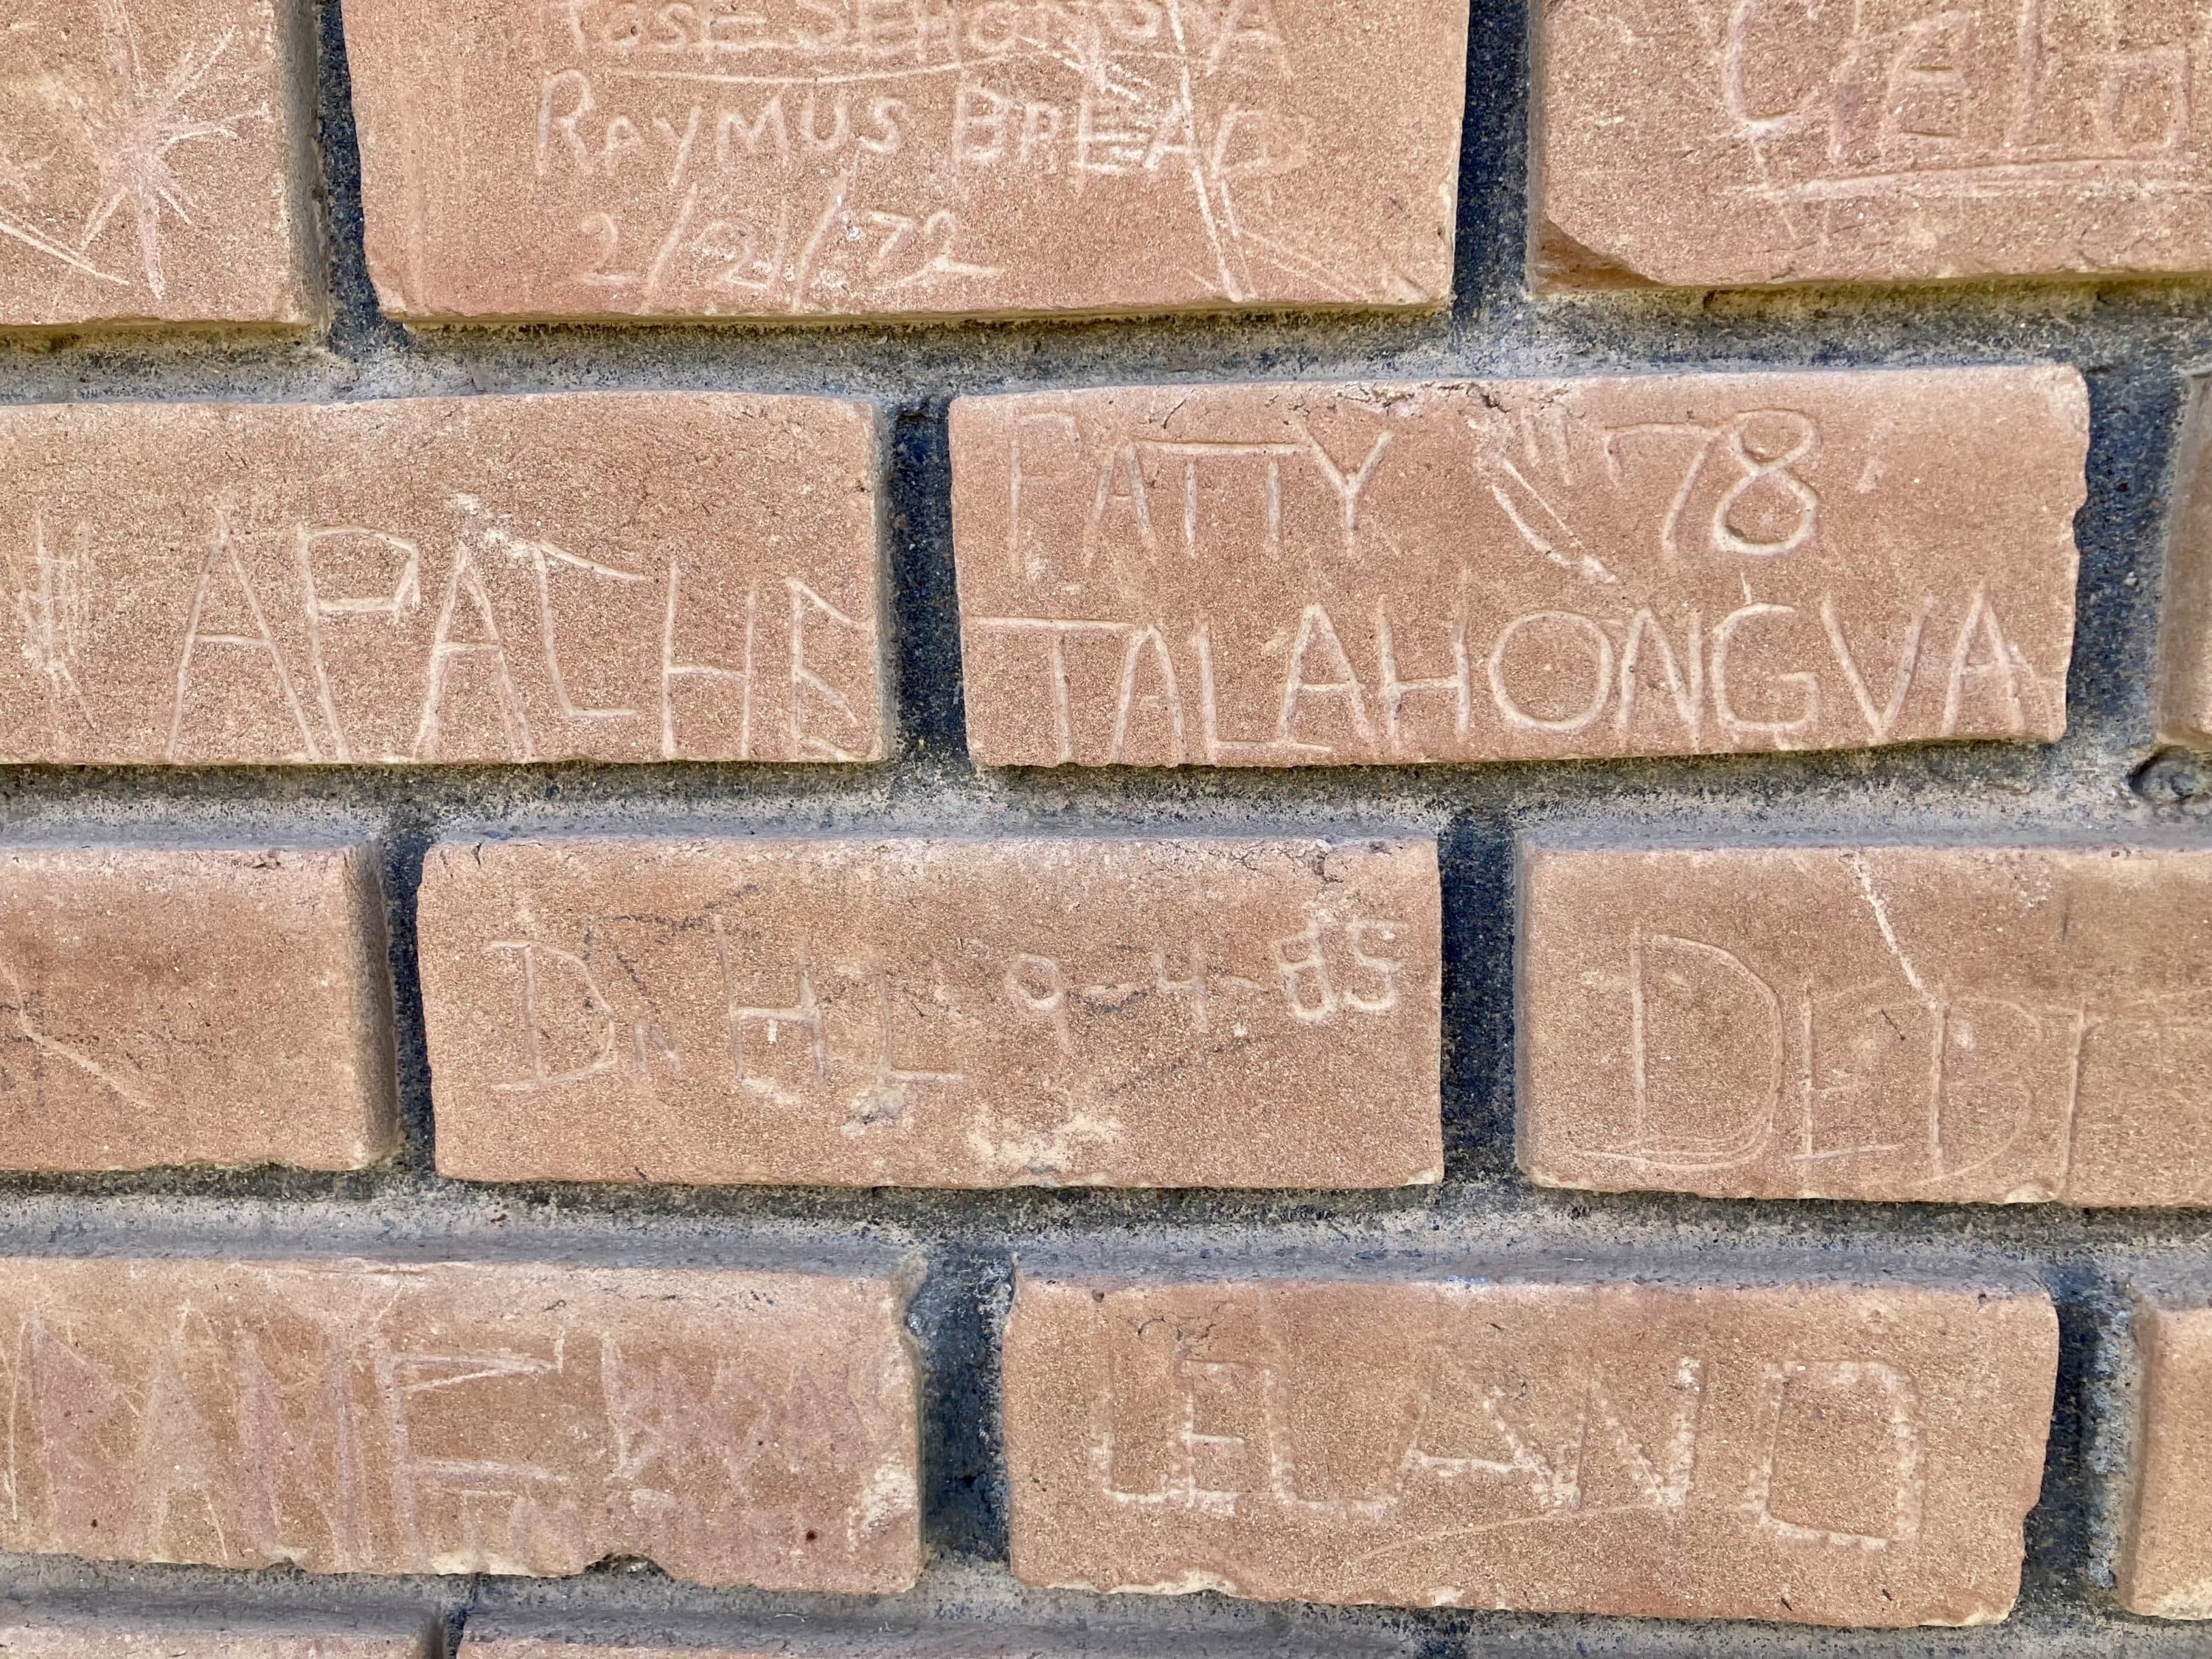 It was an unofficial tradition for students to etch their names in the brick at Memorial Hall. Patty Talahongva, a Hopi student who attended Phoenix Indian in 1978, remembers the day she carved this brick. (Peter O'Dowd)